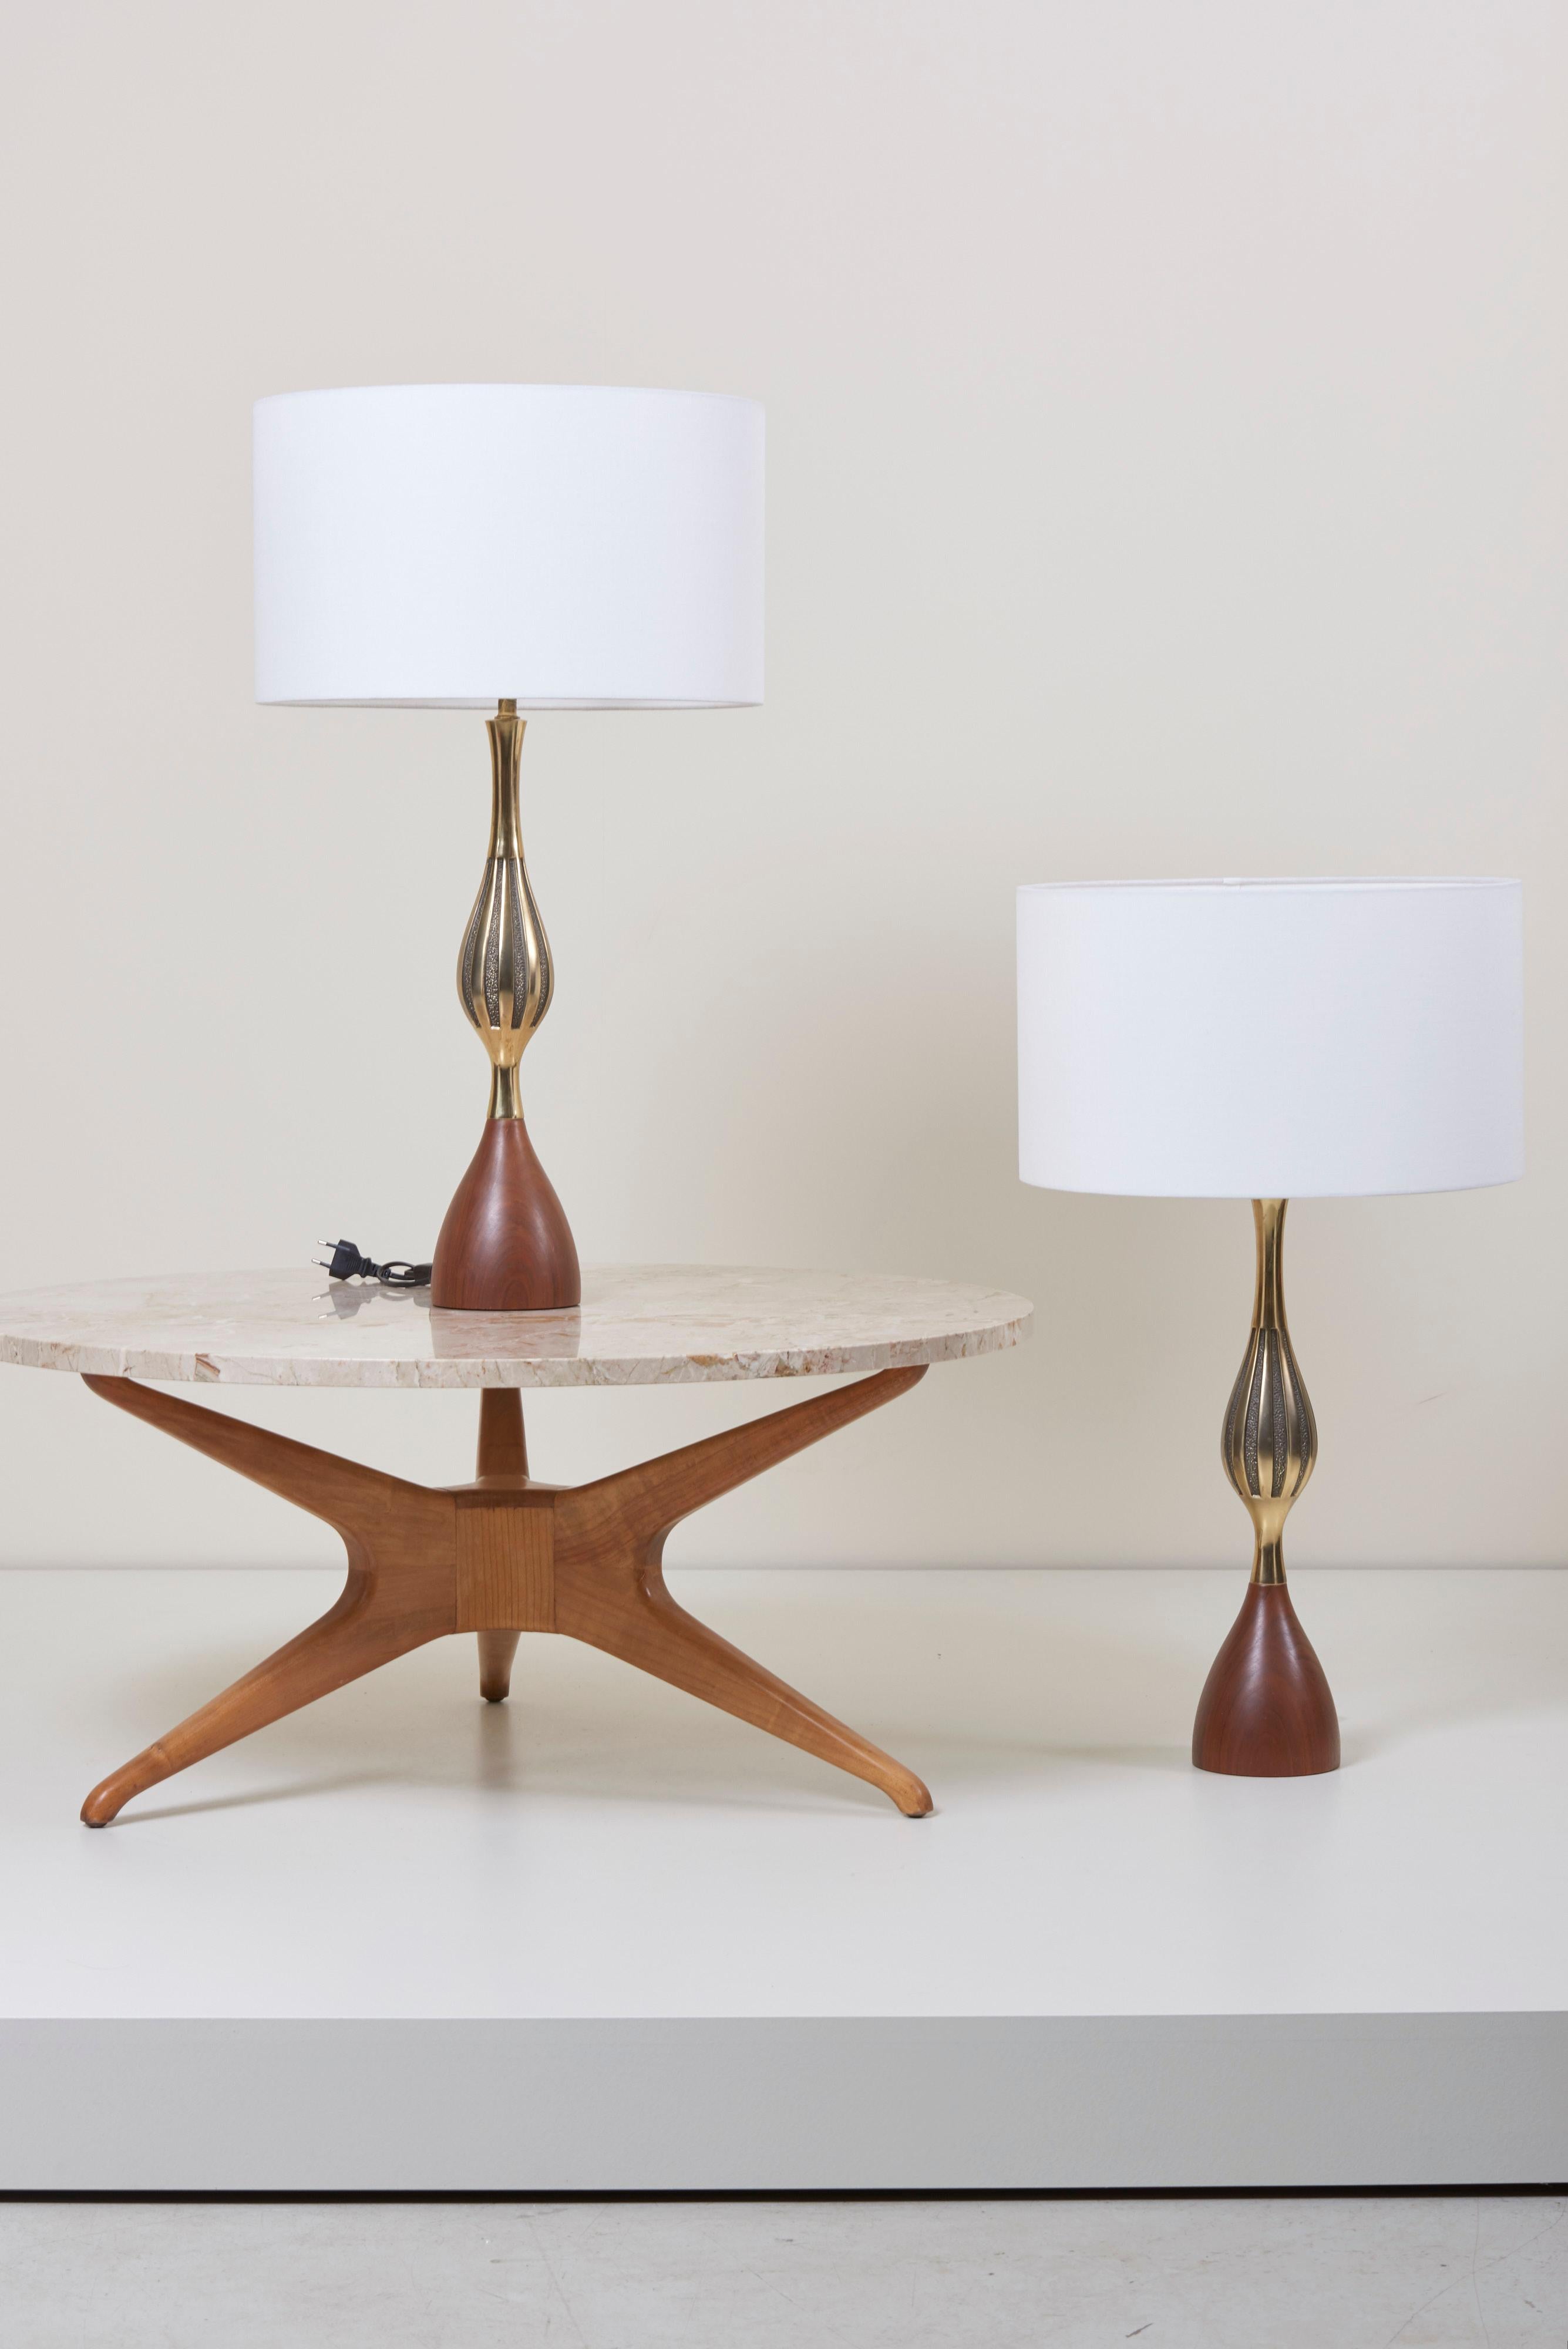 Pair of large table lamps designed by Tony Paul for Westwood Lightning. The lamps are in walnut and brass with new shades. One x E27 / model a bulb each.
To be on the safe side, the lamp should be checked locally by a specialist concerning local